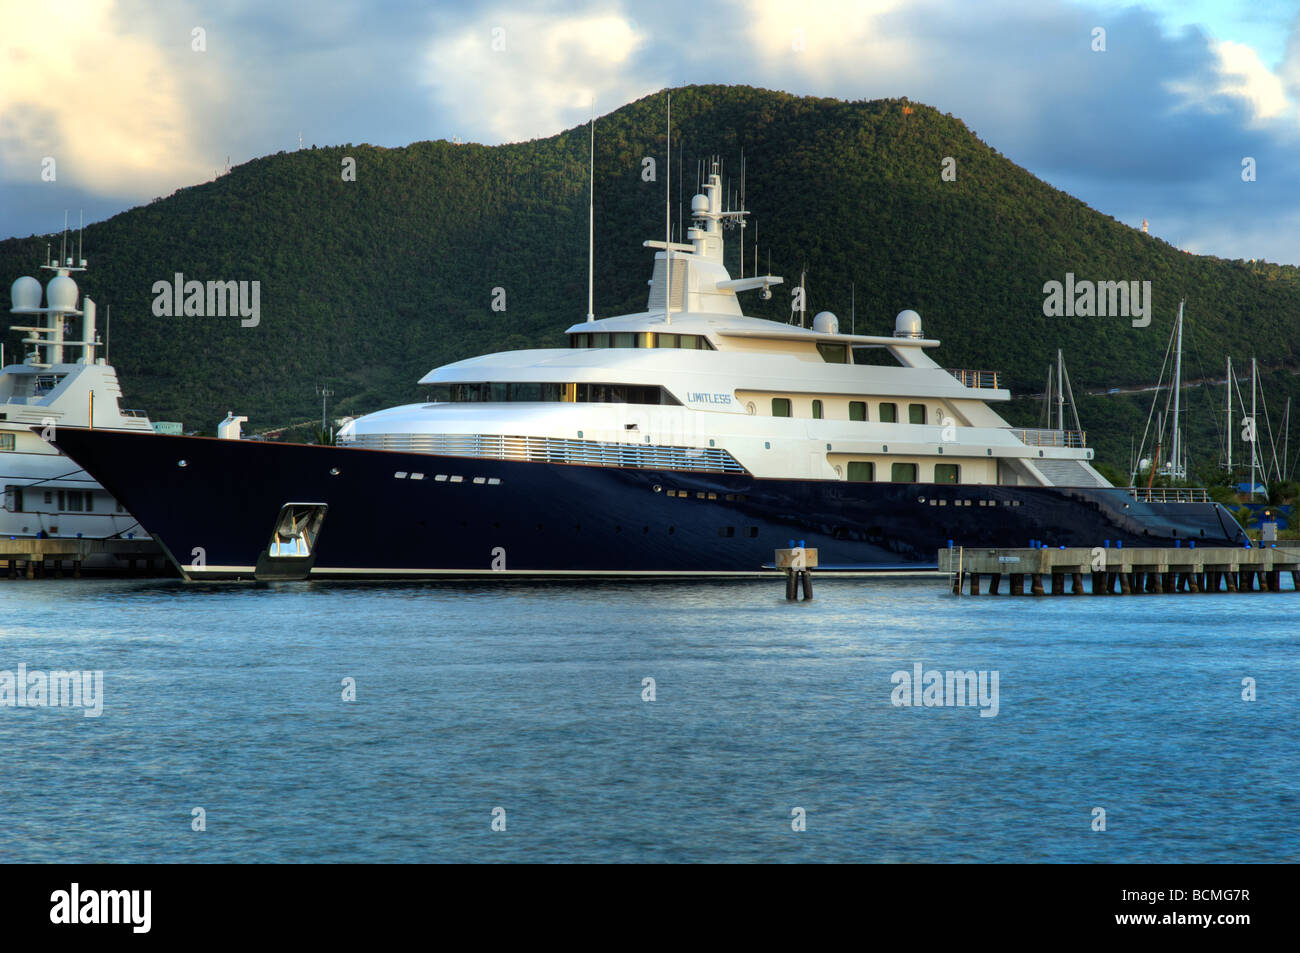 The large yacht "Limitless" docked in St. Martin, West Indies. Stock Photo